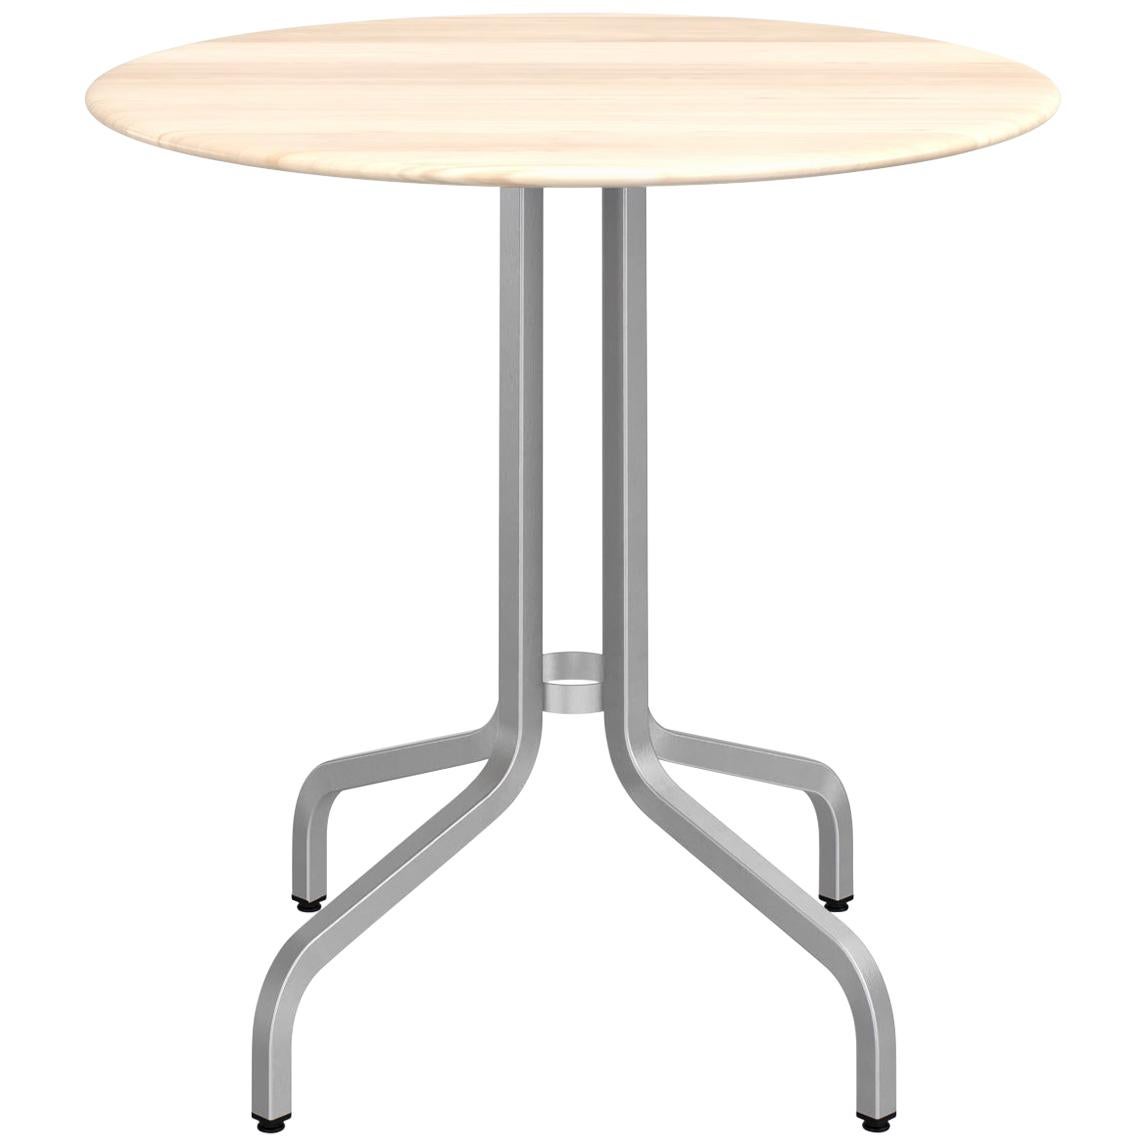 Emeco 1 Inch Medium Round Aluminum Cafe Table with Wood Top by Jasper Morrison